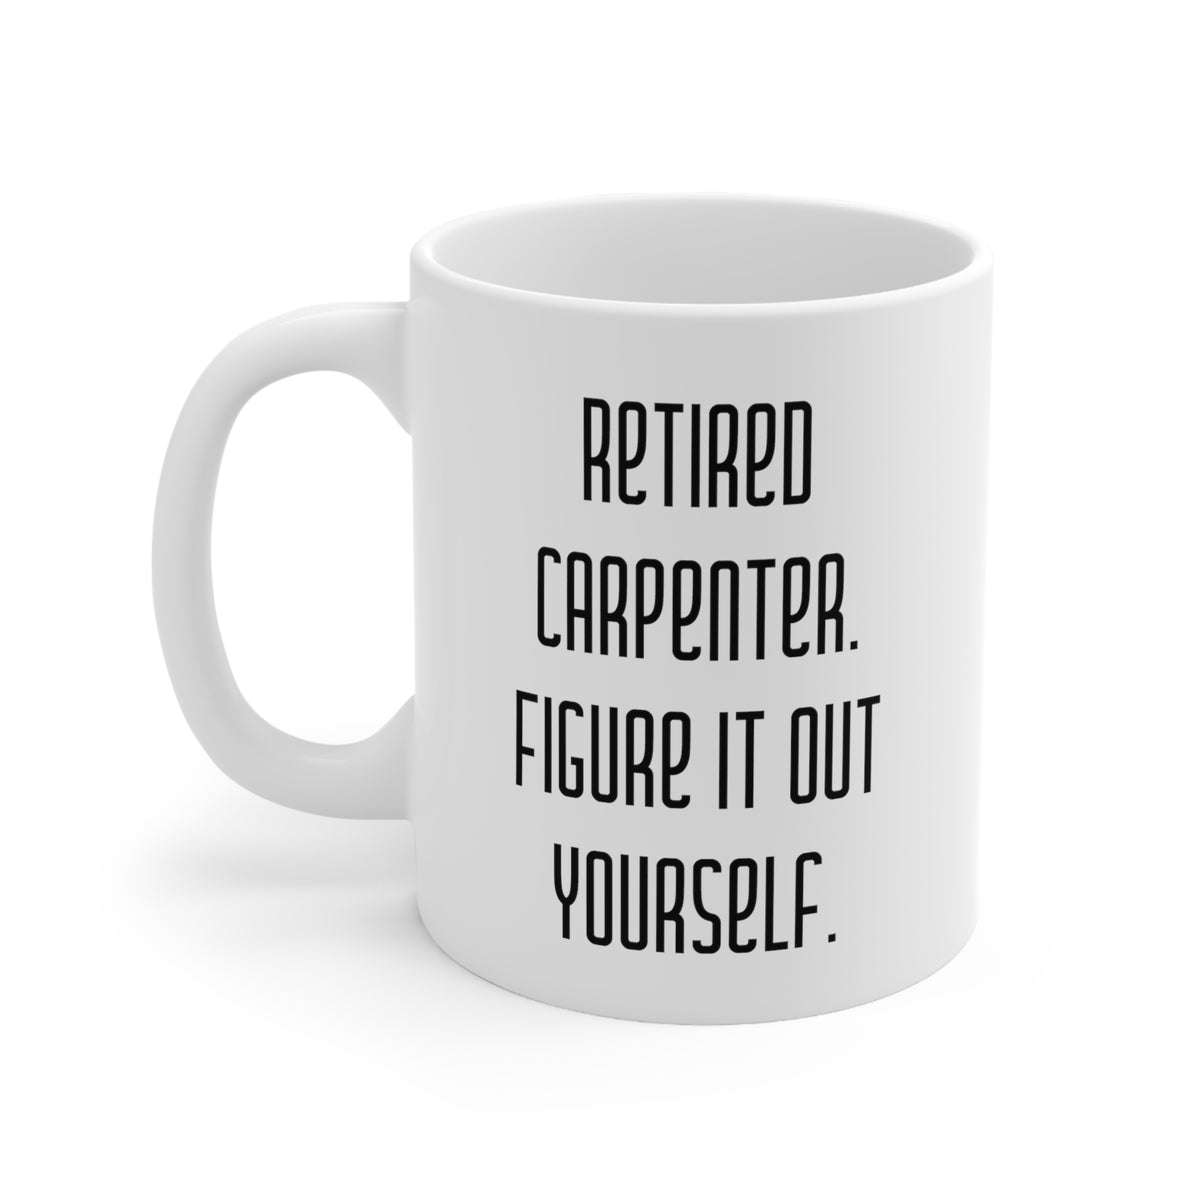 Unique Idea Carpenter Gifts, Retired Carpenter. Figure It Out, Beautiful 11oz 15oz Mug For Coworkers, Cup From Team Leader, Friends mug, Mug gift, Gift for friends